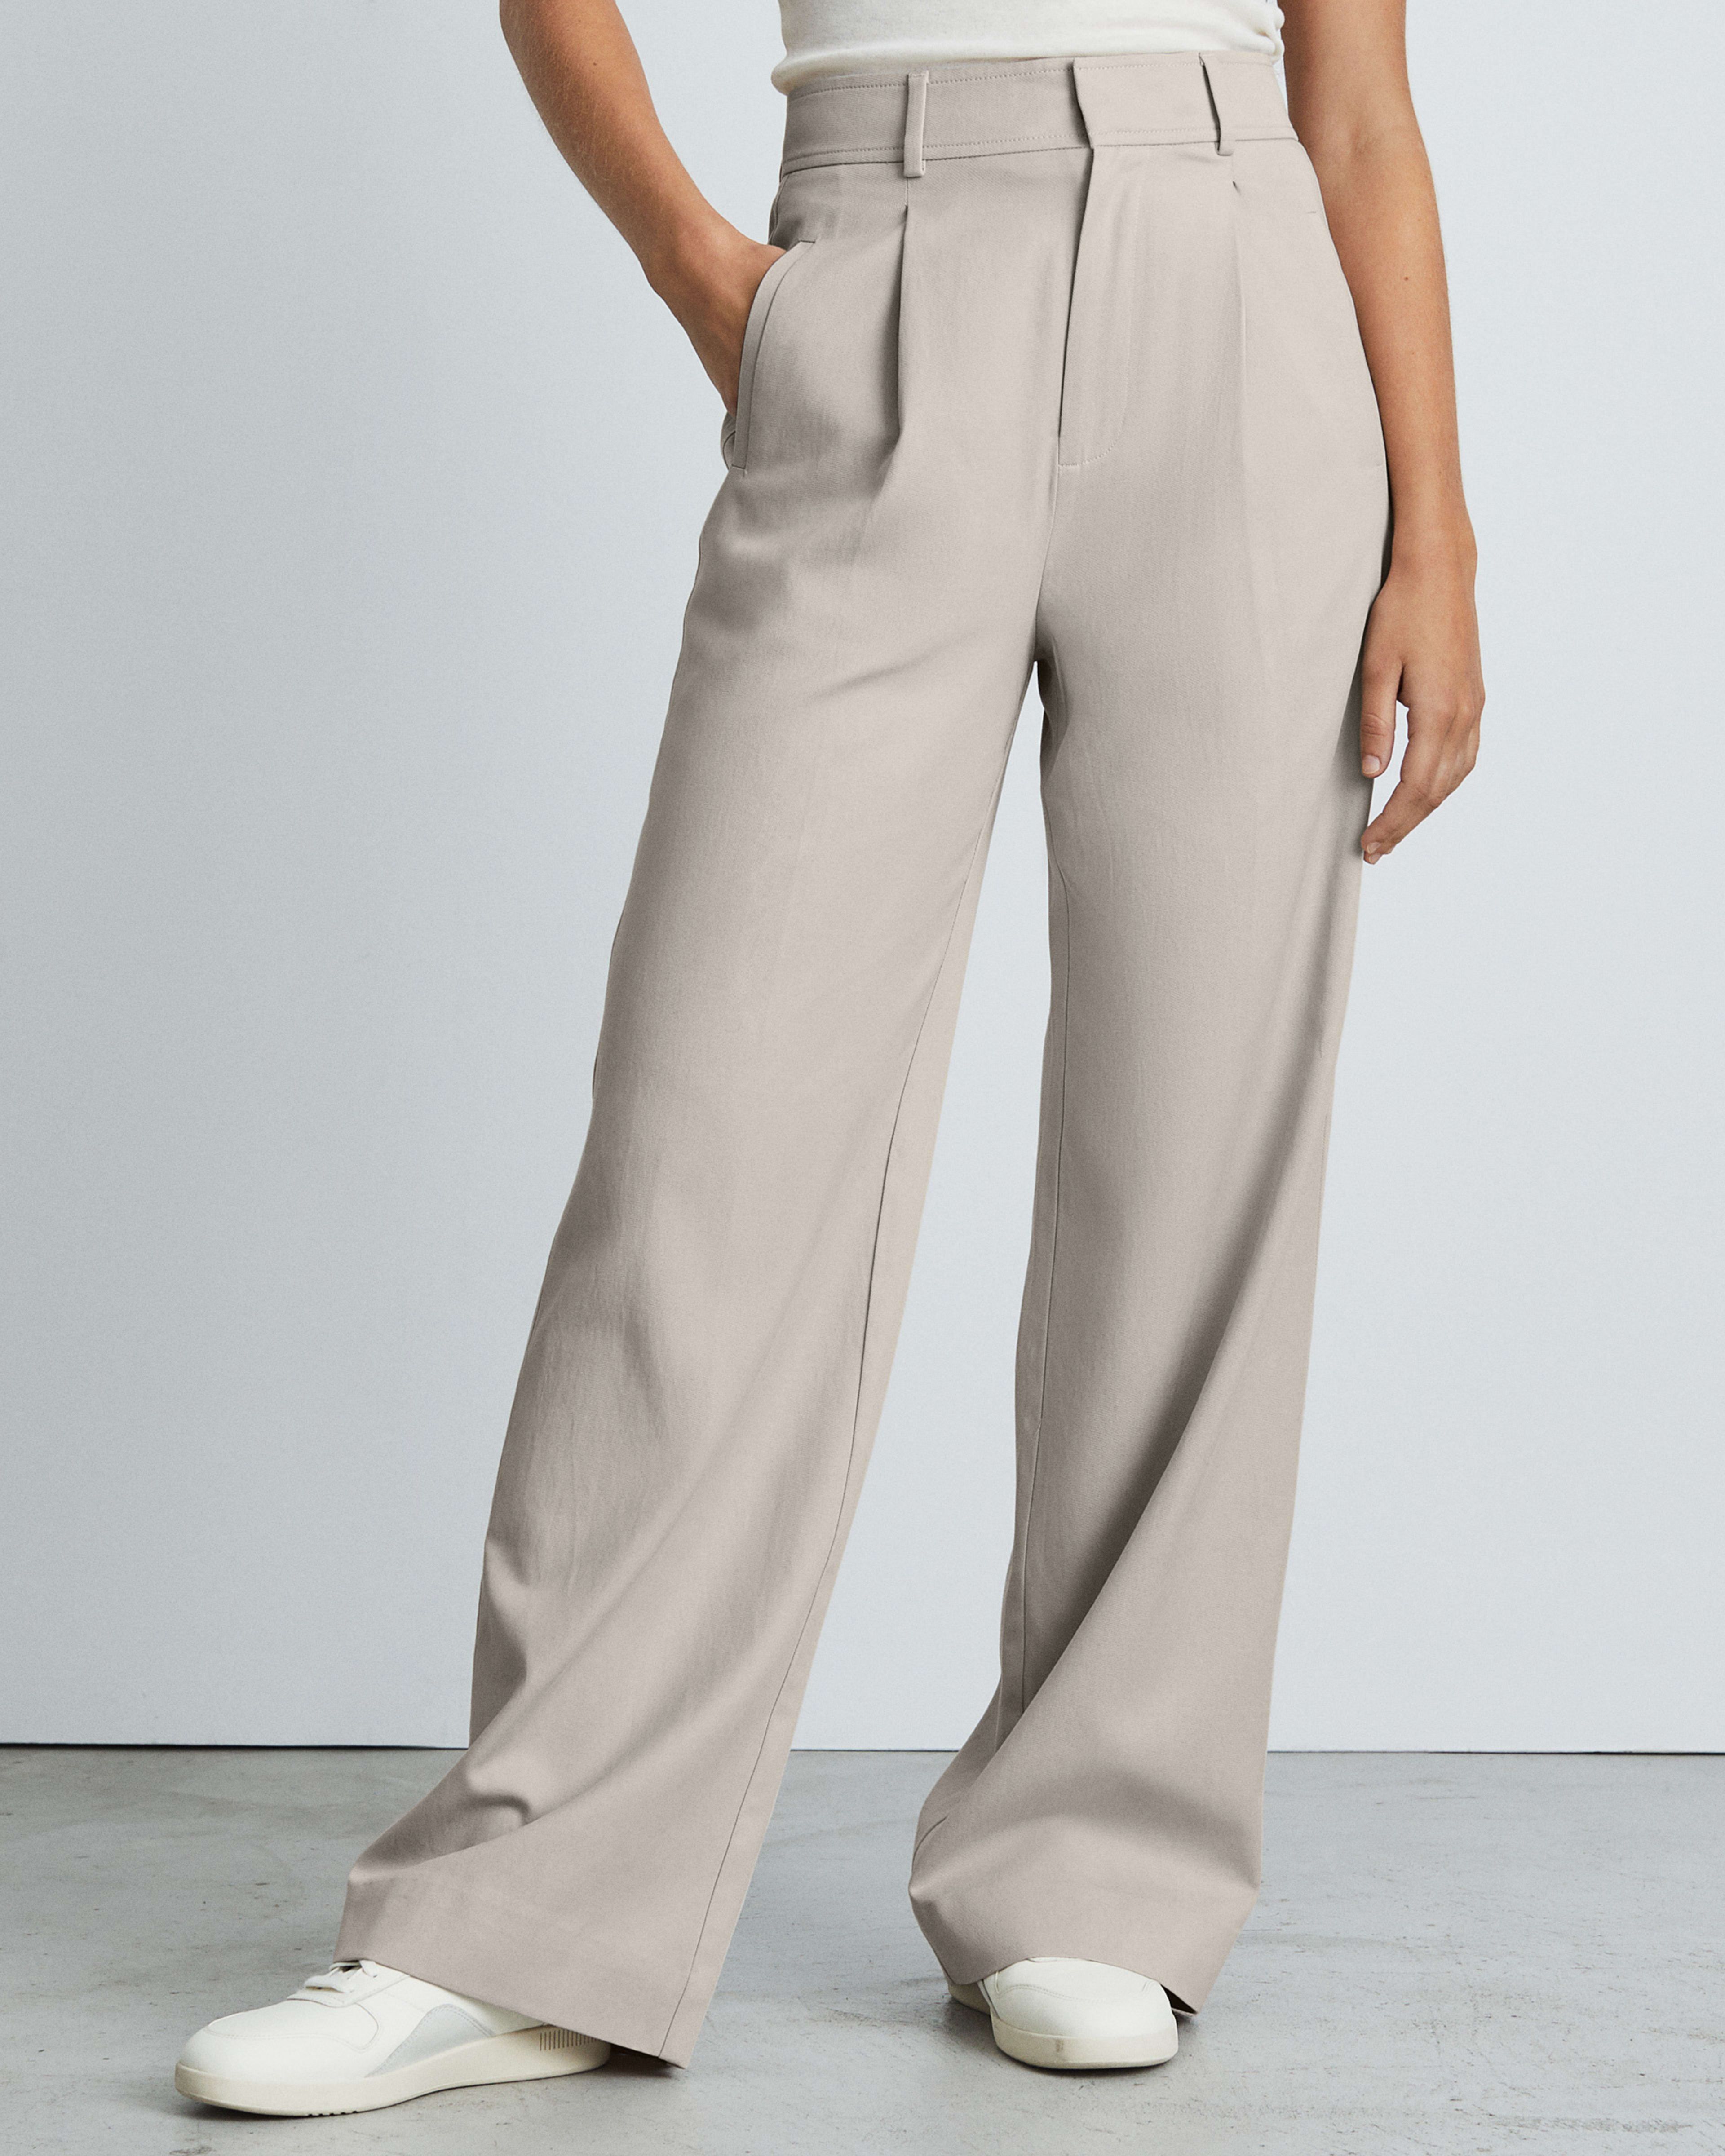 Buy Grey Trousers & Pants for Women by ORCHID BLUES Online | Ajio.com